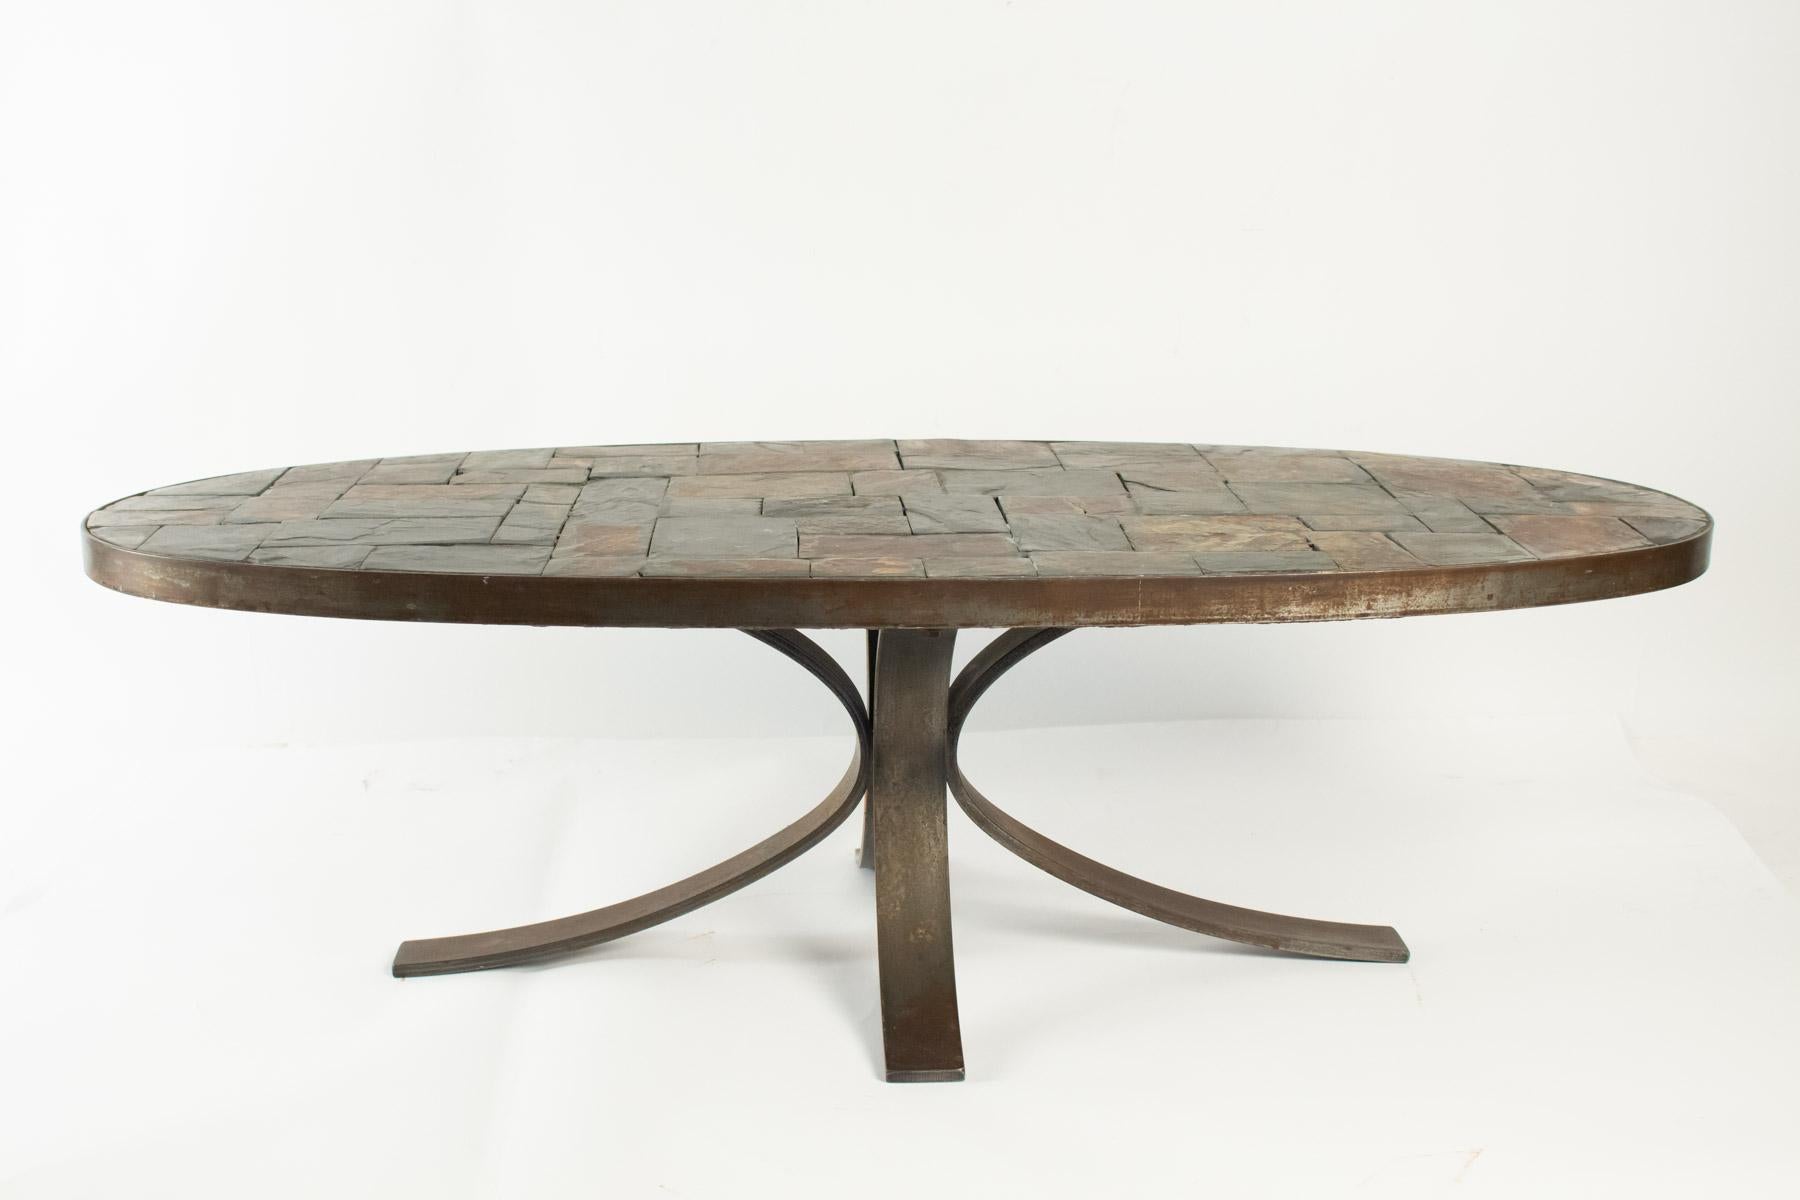 Oval coffee table in wrought iron and stone from the Ardoise, circa 1960-1970.
Measures: H 33cm, L 110cm, P 50cm.
 